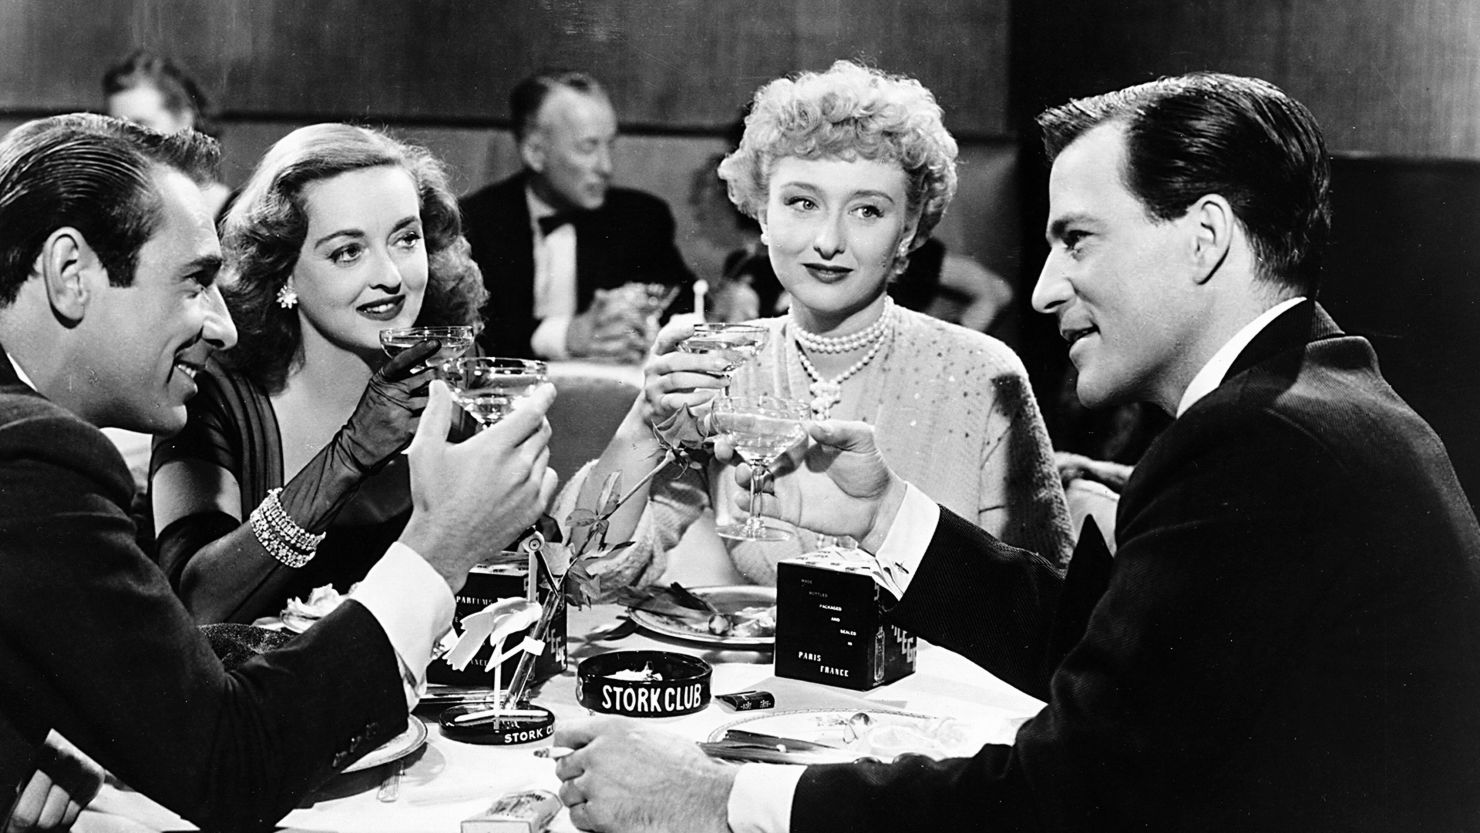 Celeste Holm, center, appears in 1950's "All About Eve" with Garry Merrill, from left, Bette Davis, and Hugh Marlow.